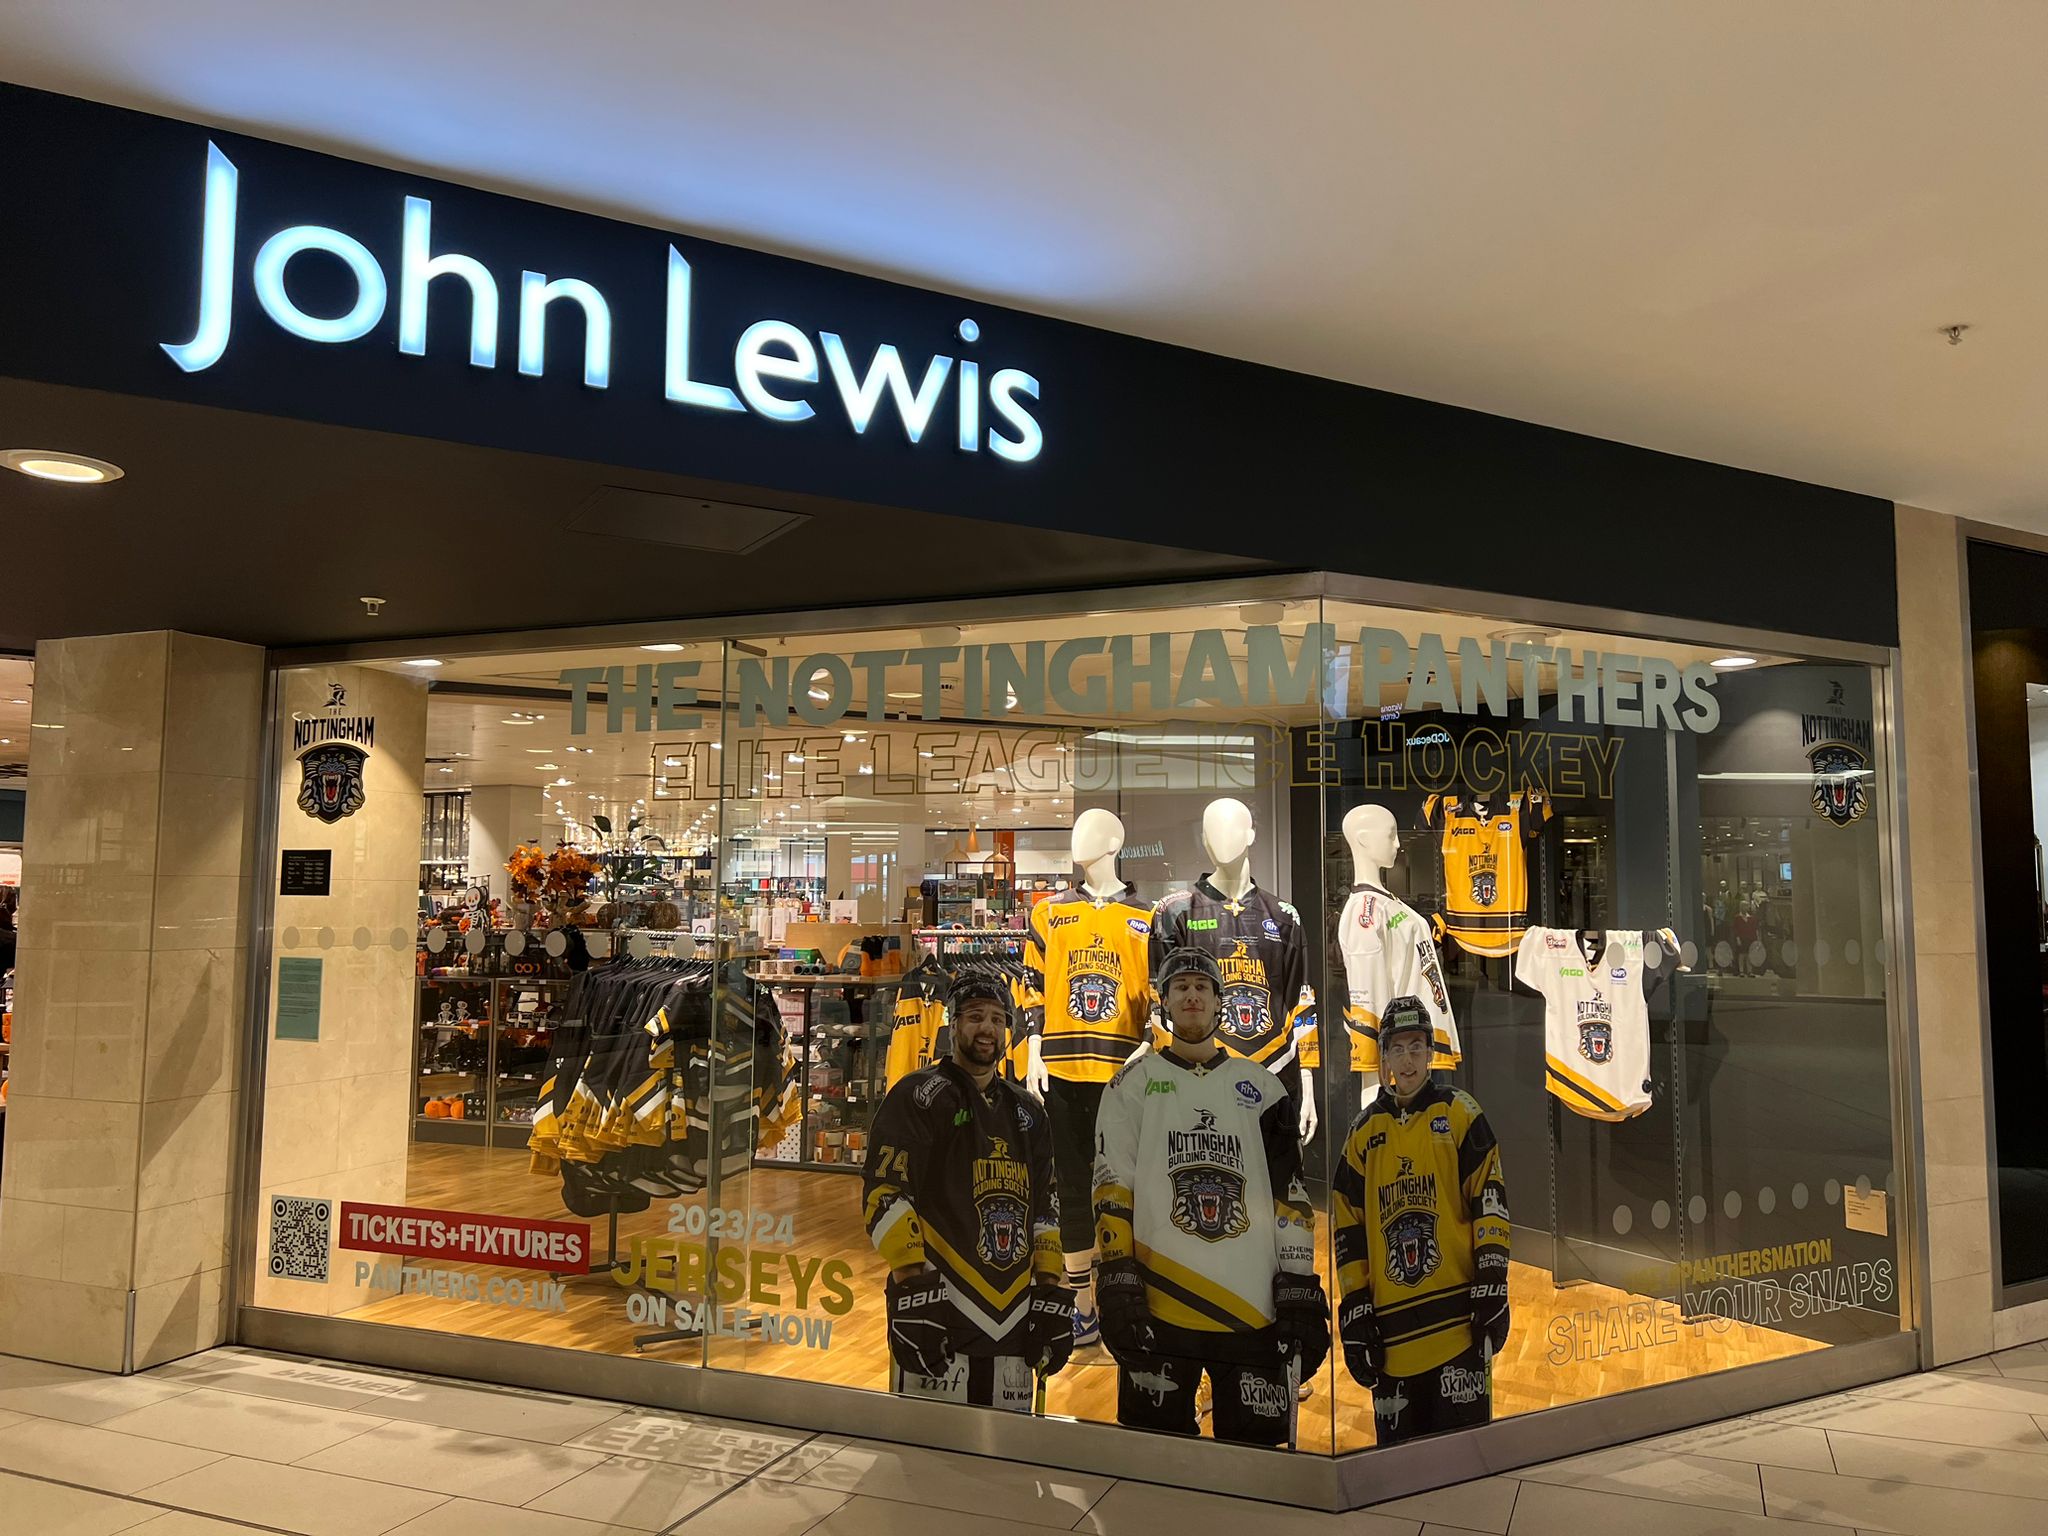 PANTHERS LINK-UP WITH JOHN LEWIS Top Image